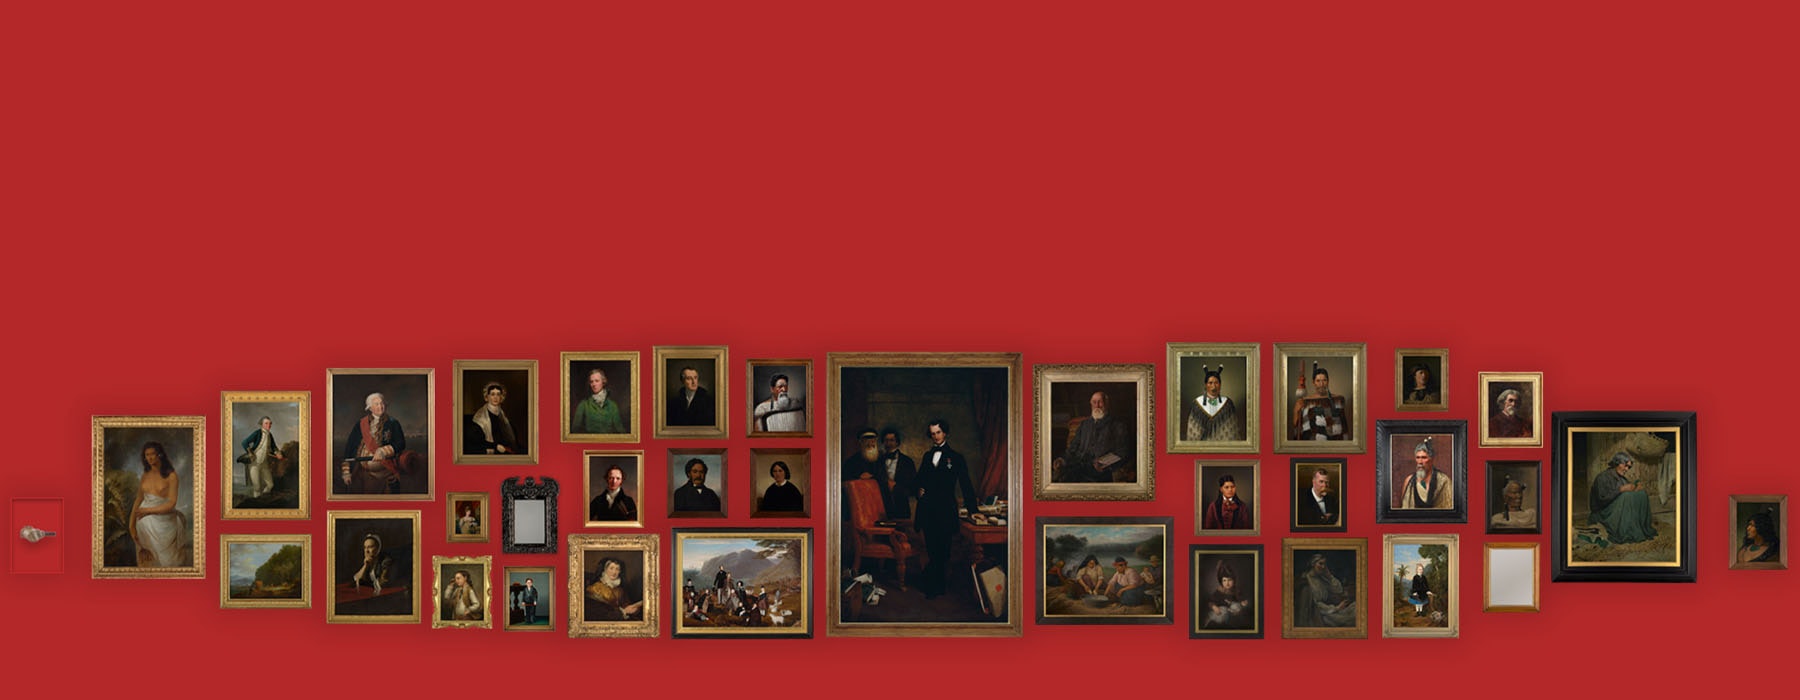 A selection of portraits lined up on a red wall